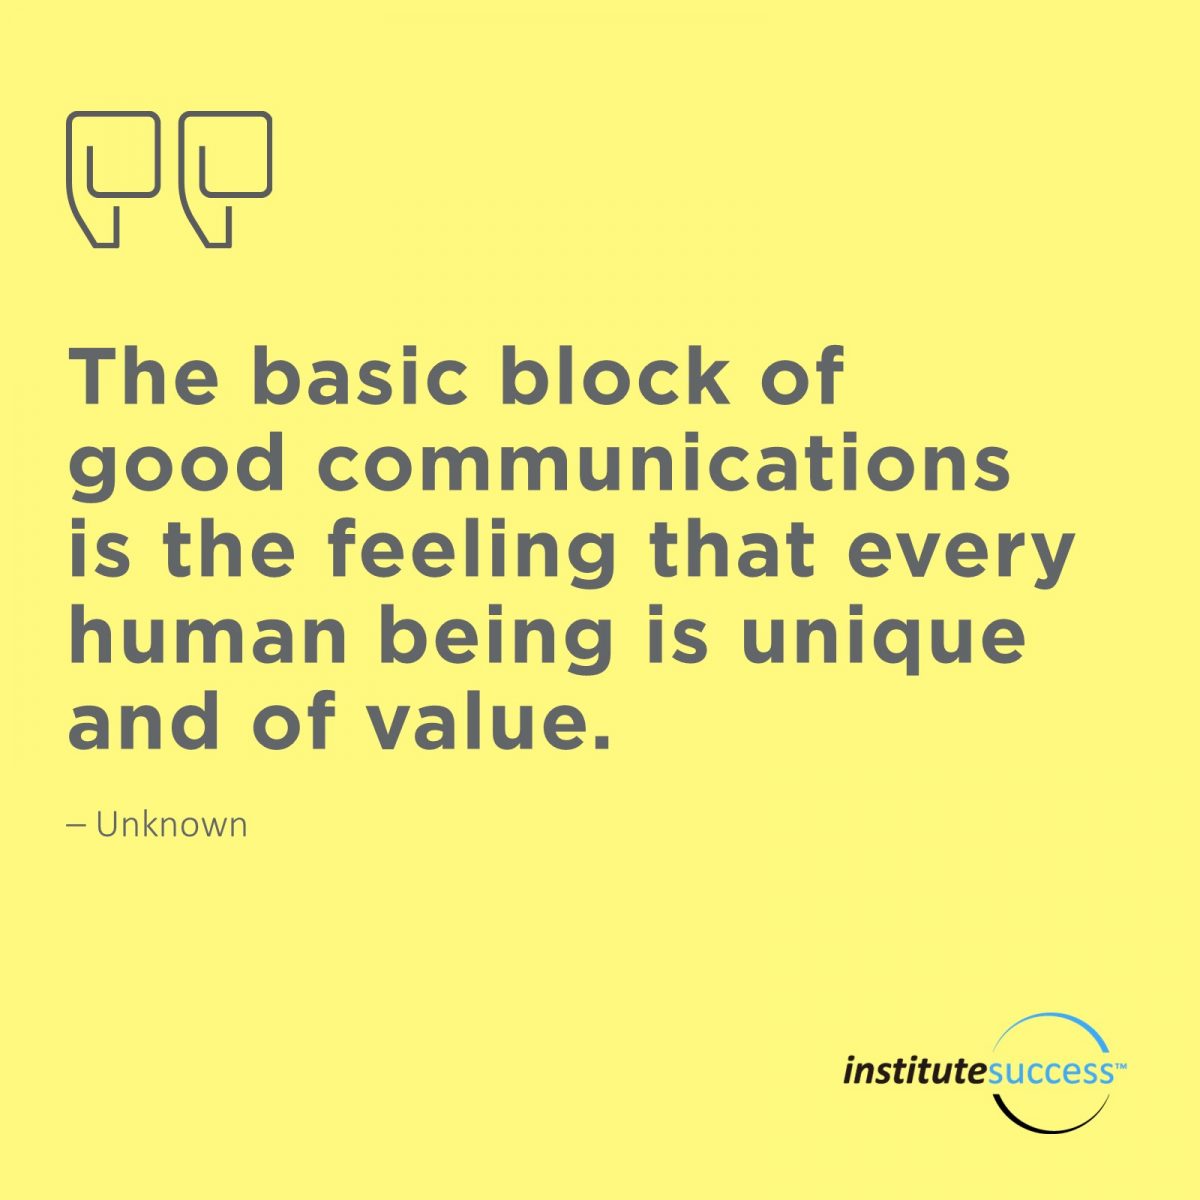 The basic block of good communications is the feeling that every human being is unique and of value – Unknown